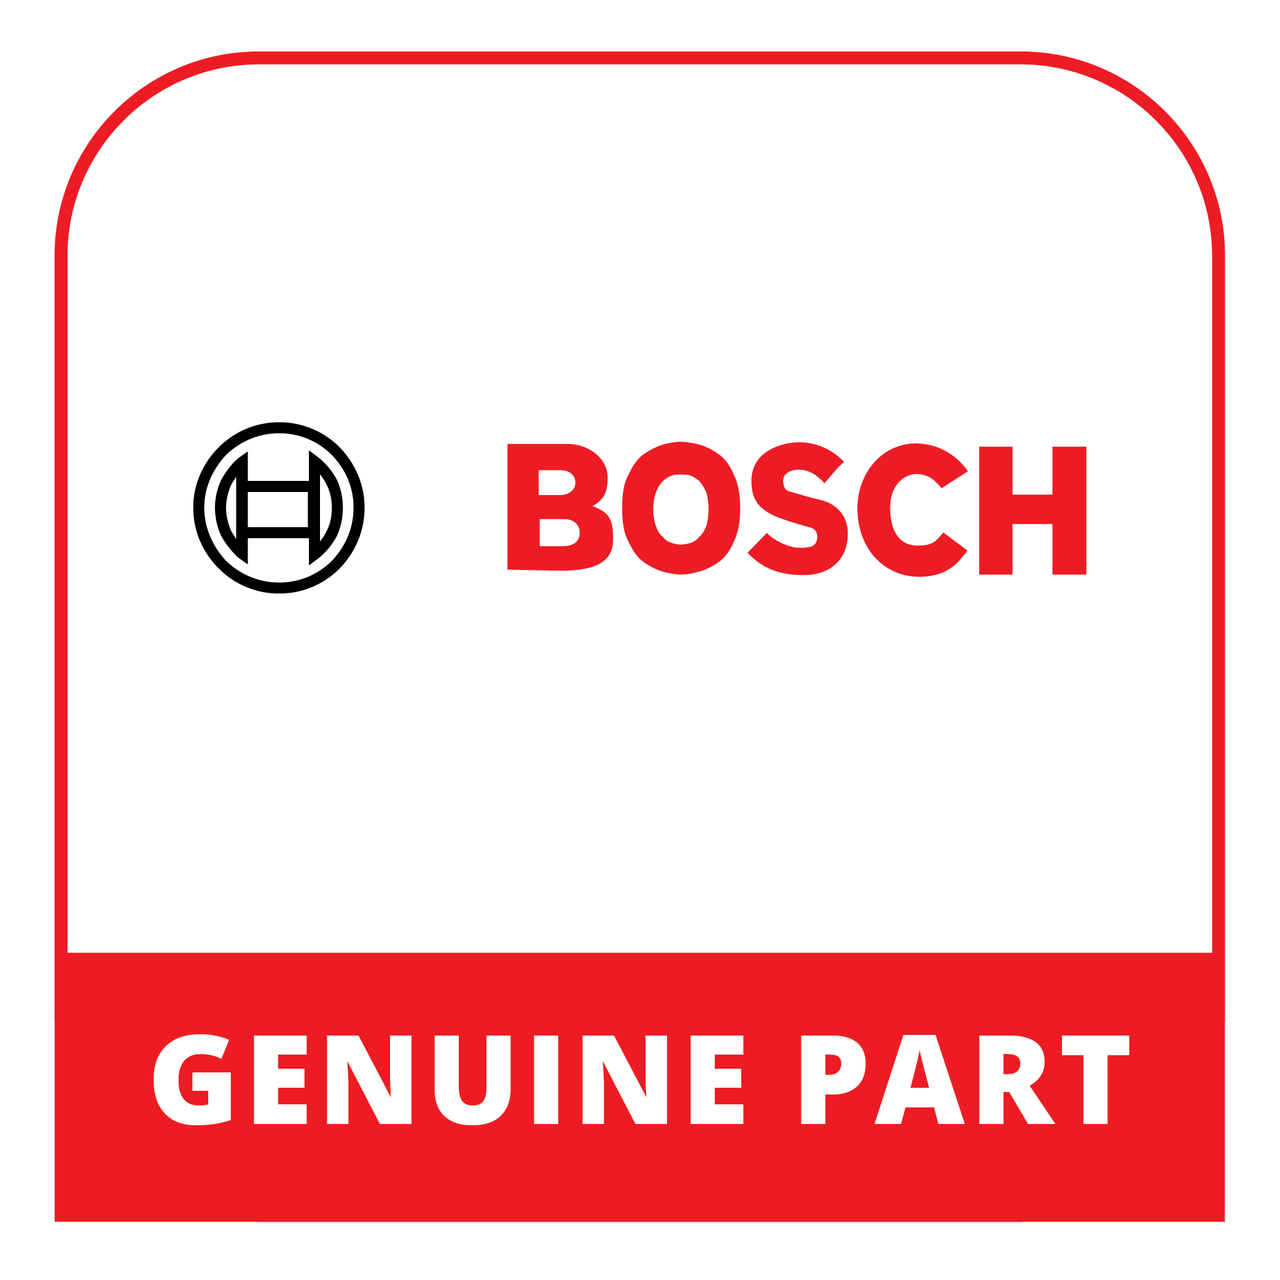 Bosch (Thermador) 11034093 - Ceramic Plate - Genuine Bosch (Thermador) Part